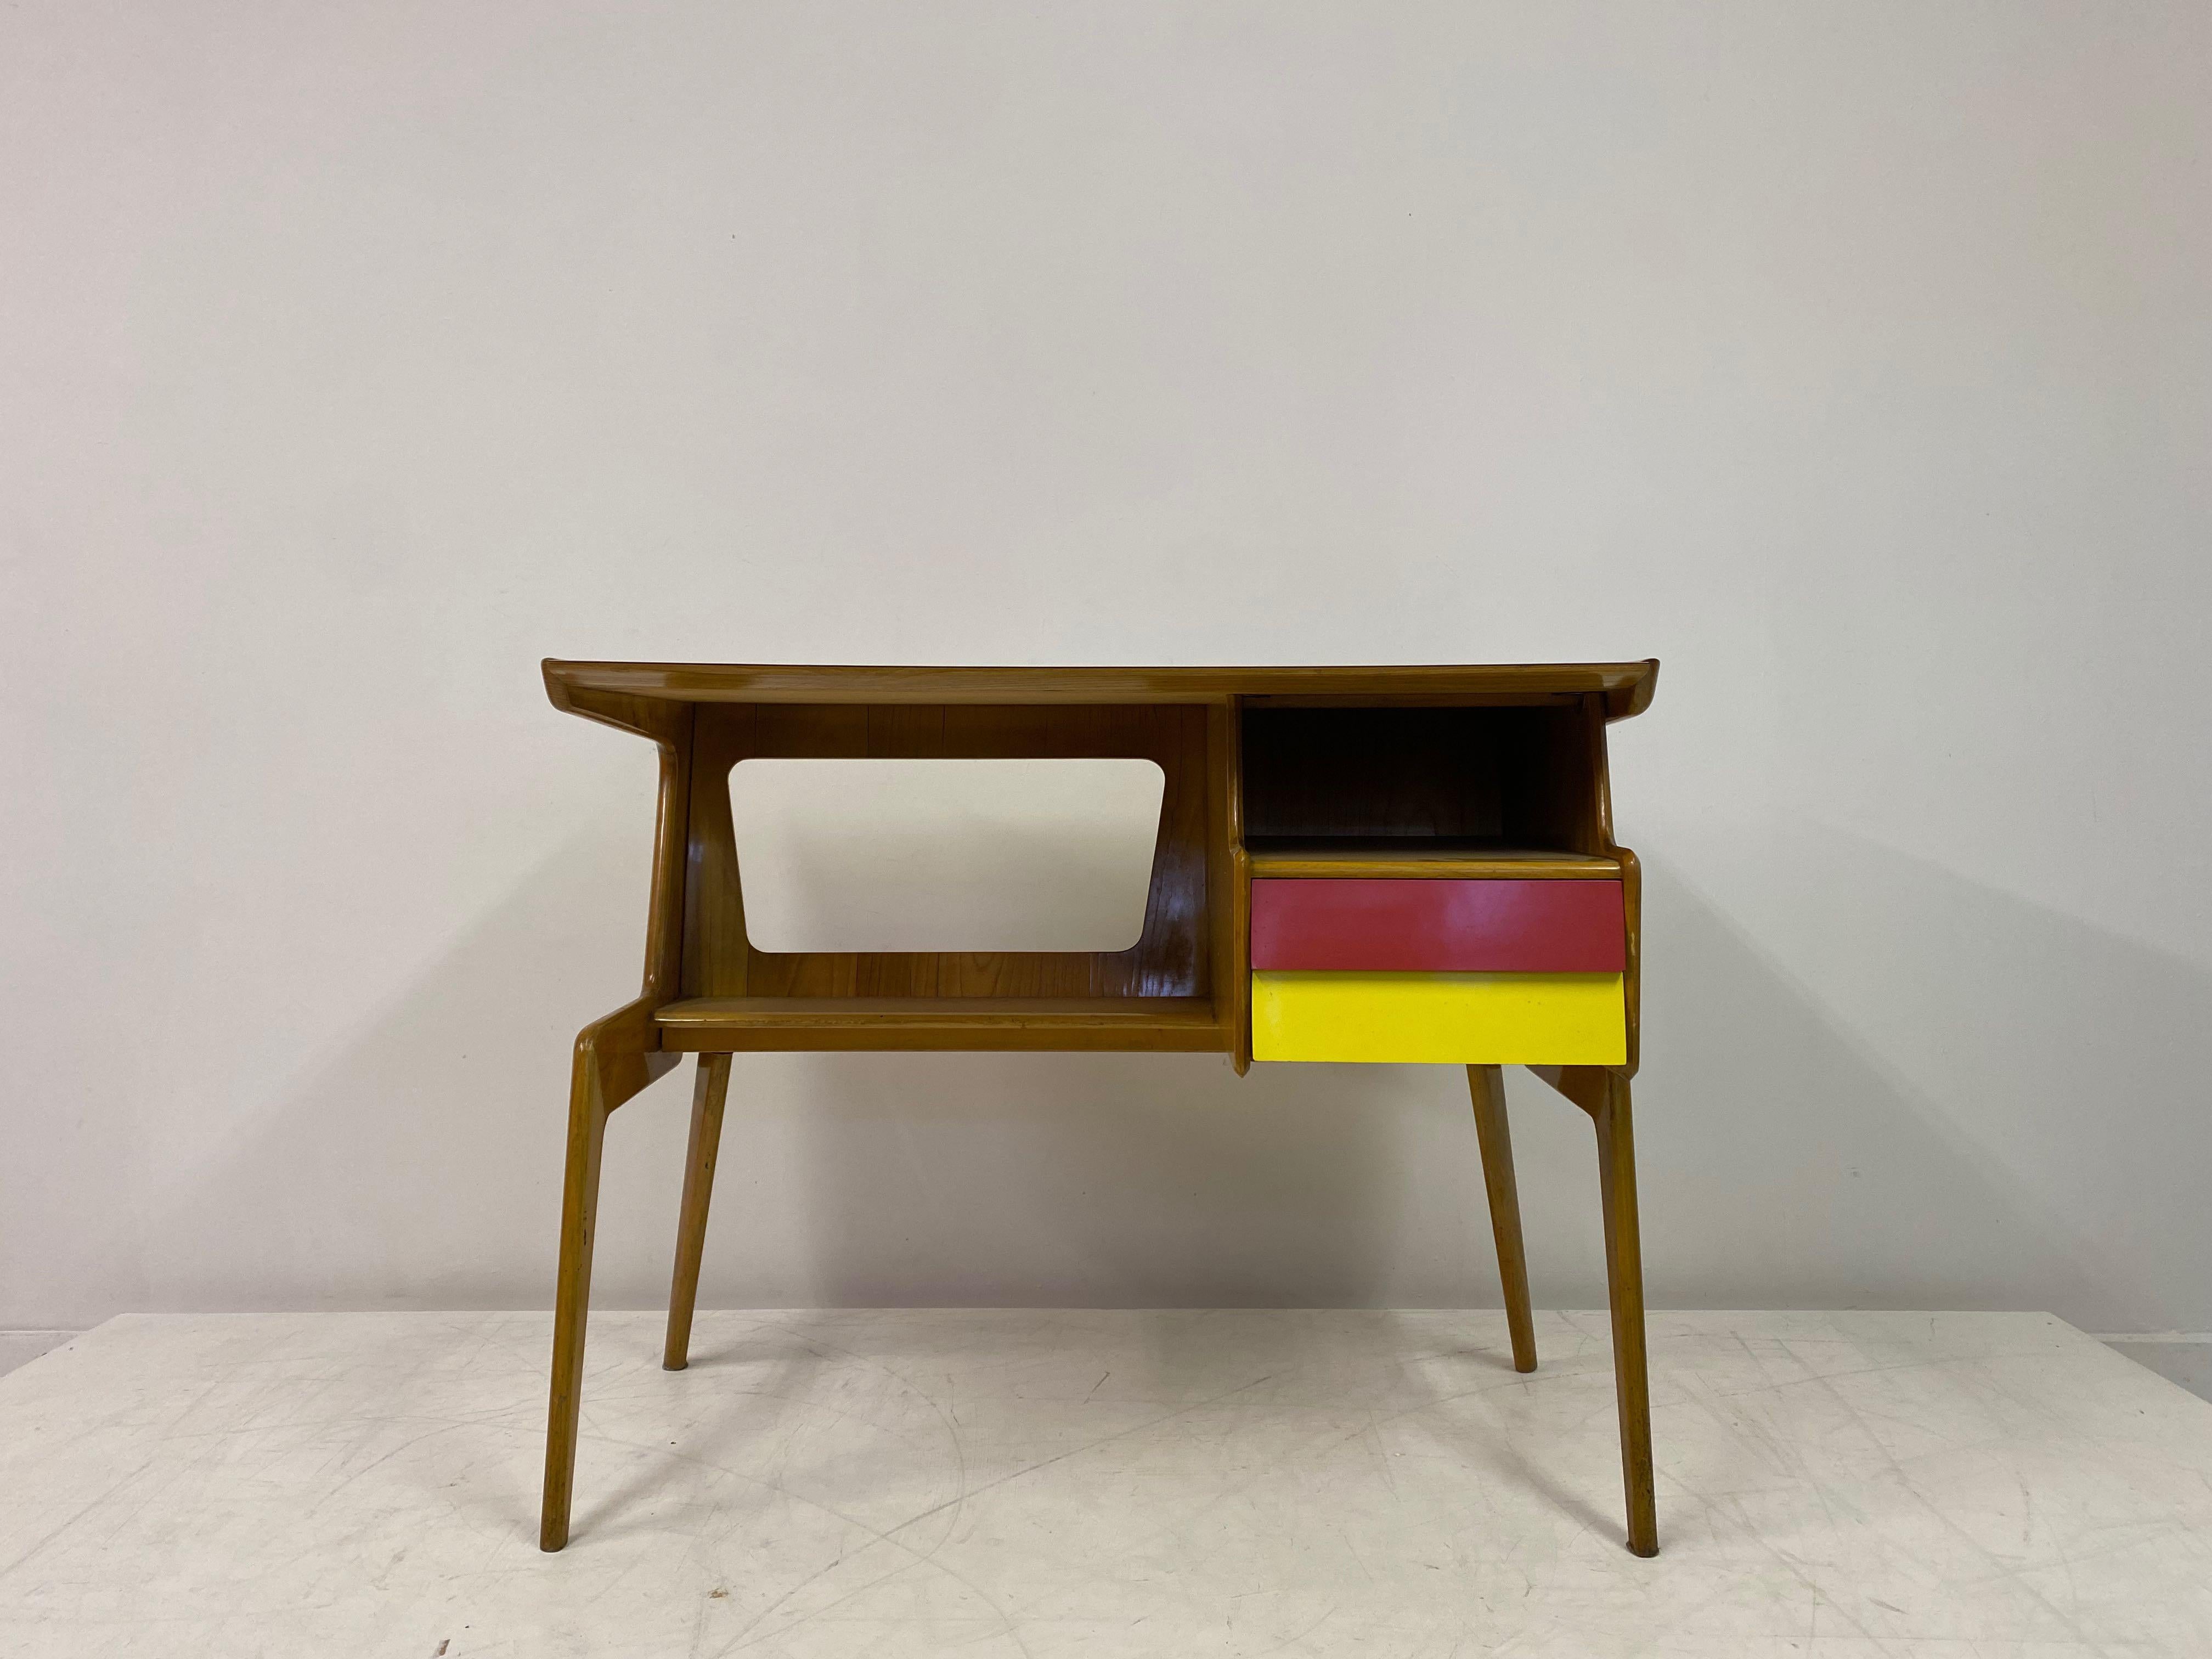 Compact sized desk

Red formica top 

Red and yellow drawers

Geometric shape

Italy 1950s.